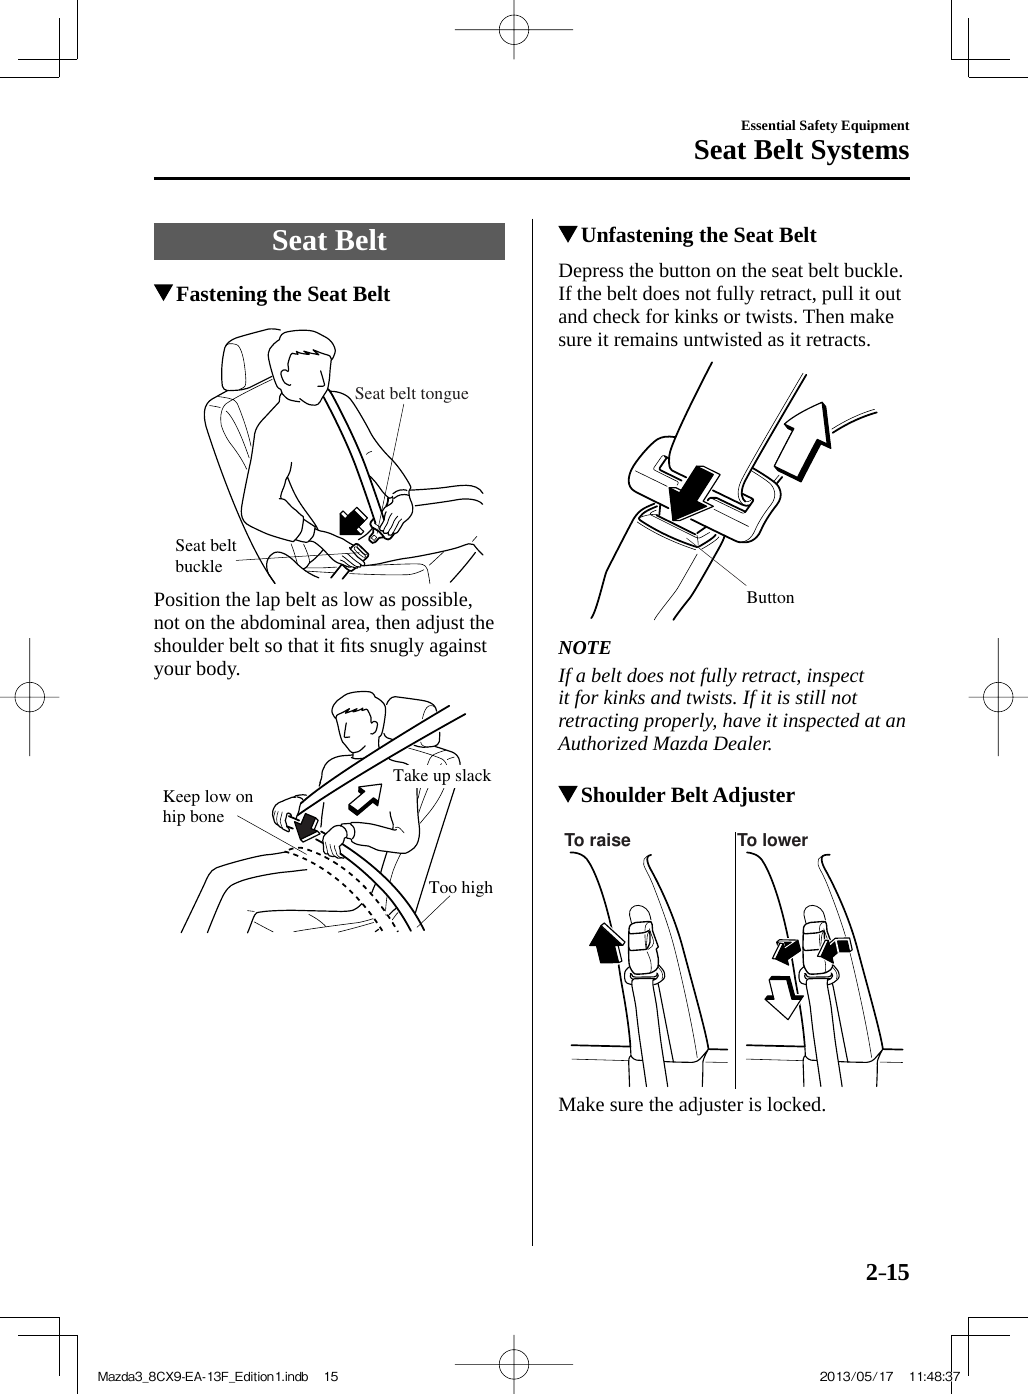 2–15Essential Safety EquipmentSeat Belt Systems Seat  Belt               Fastening the Seat Belt   Seat belt buckleSeat belt tongue   Position the lap belt as low as possible, not on the abdominal area, then adjust the shoulder belt so that it ﬁ ts snugly against your body. Keep low on hip boneToo highTake up slack            Unfastening the Seat Belt    Depress the button on the seat belt buckle. If the belt does not fully retract, pull it out and check for kinks or twists. Then make sure it remains untwisted as it retracts. Button     NOTE  If a belt does not fully retract, inspect it for kinks and twists. If it is still not retracting properly, have it inspected at an Authorized Mazda Dealer.             Shoulder Belt Adjuster   To raise To lower   Make sure the adjuster is locked.Mazda3_8CX9-EA-13F_Edition1.indb   15Mazda3_8CX9-EA-13F_Edition1.indb   15 2013/05/17   11:48:372013/05/17   11:48:37